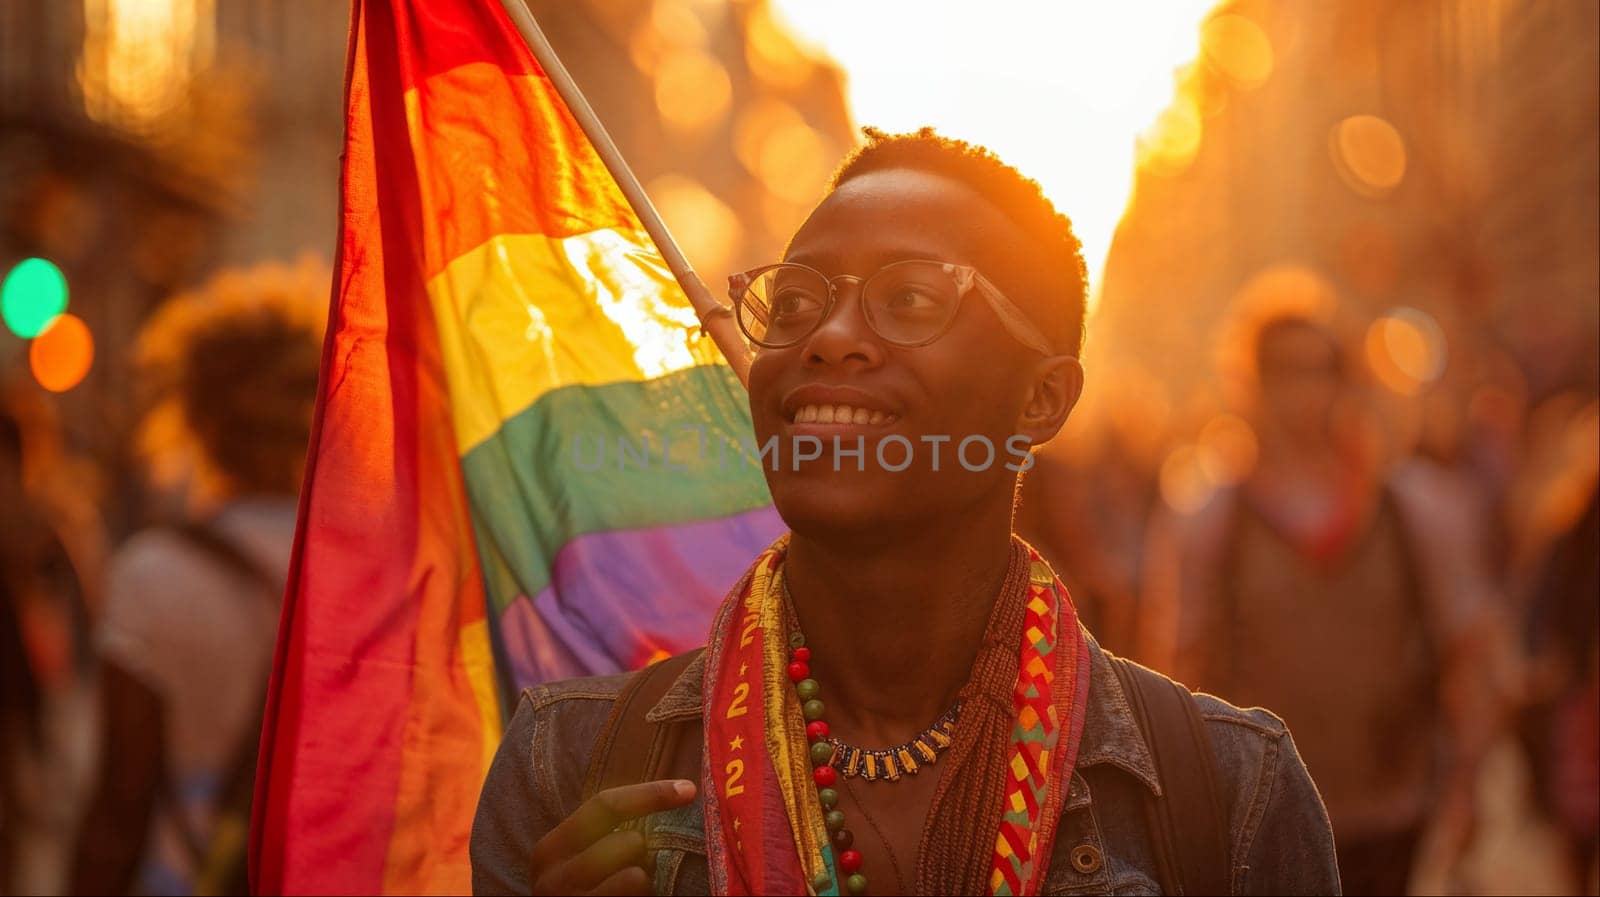 A smiling man proudly lifts the rainbow flag, celebrating at a pride parade against a warm sunset backdrop. by evdakovka